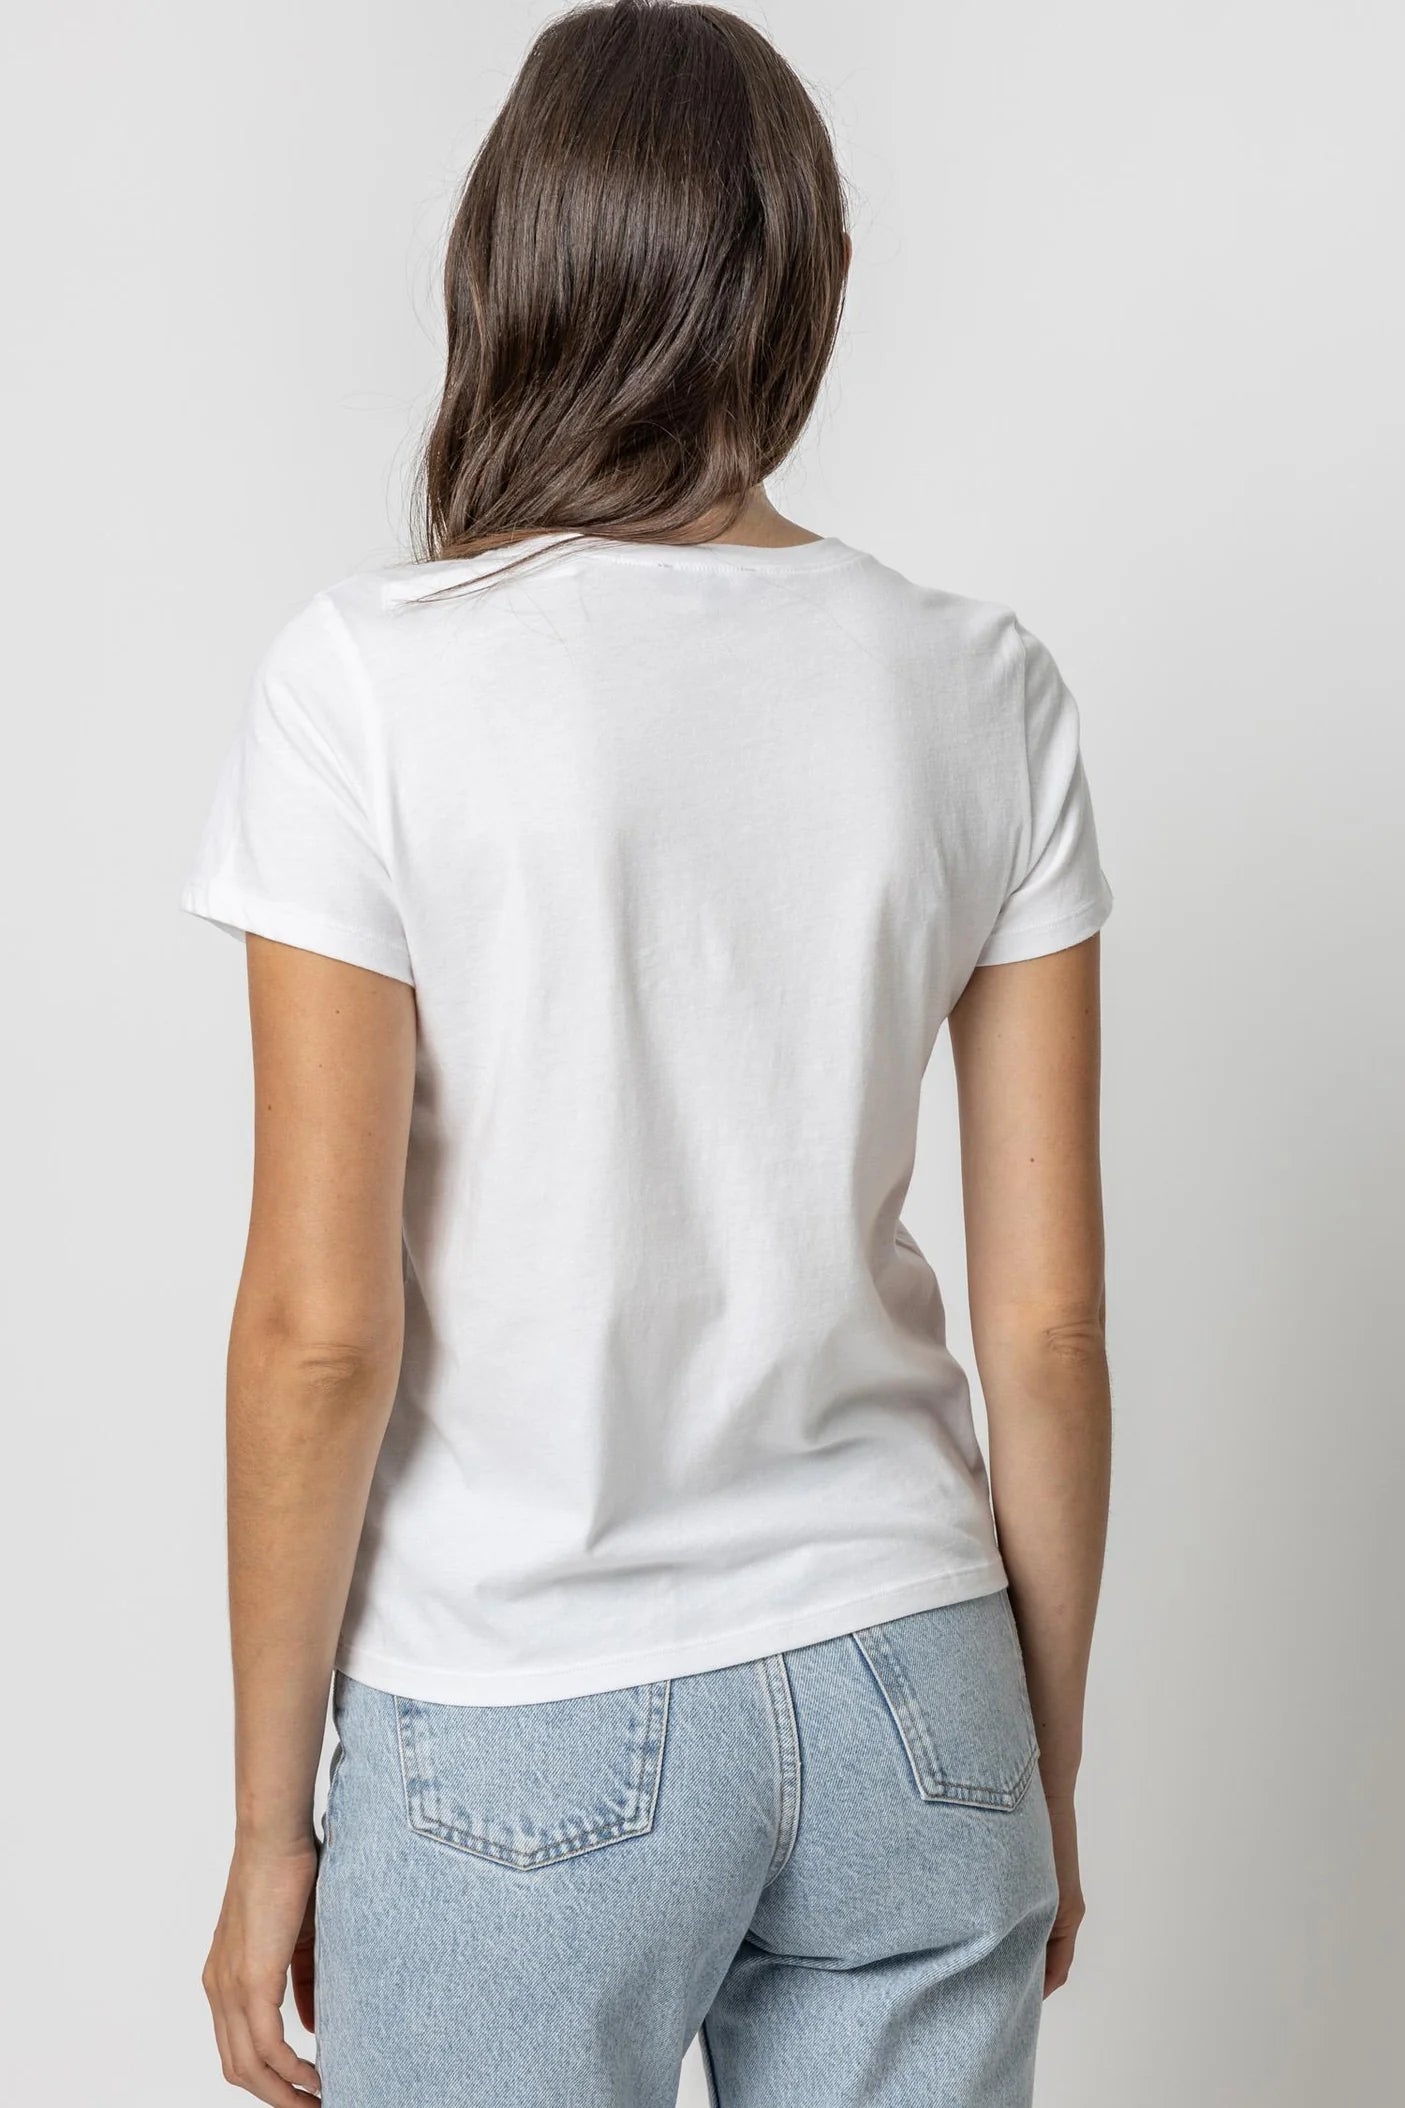 Short Sleeve Crewneck Tee in white by Lilla P